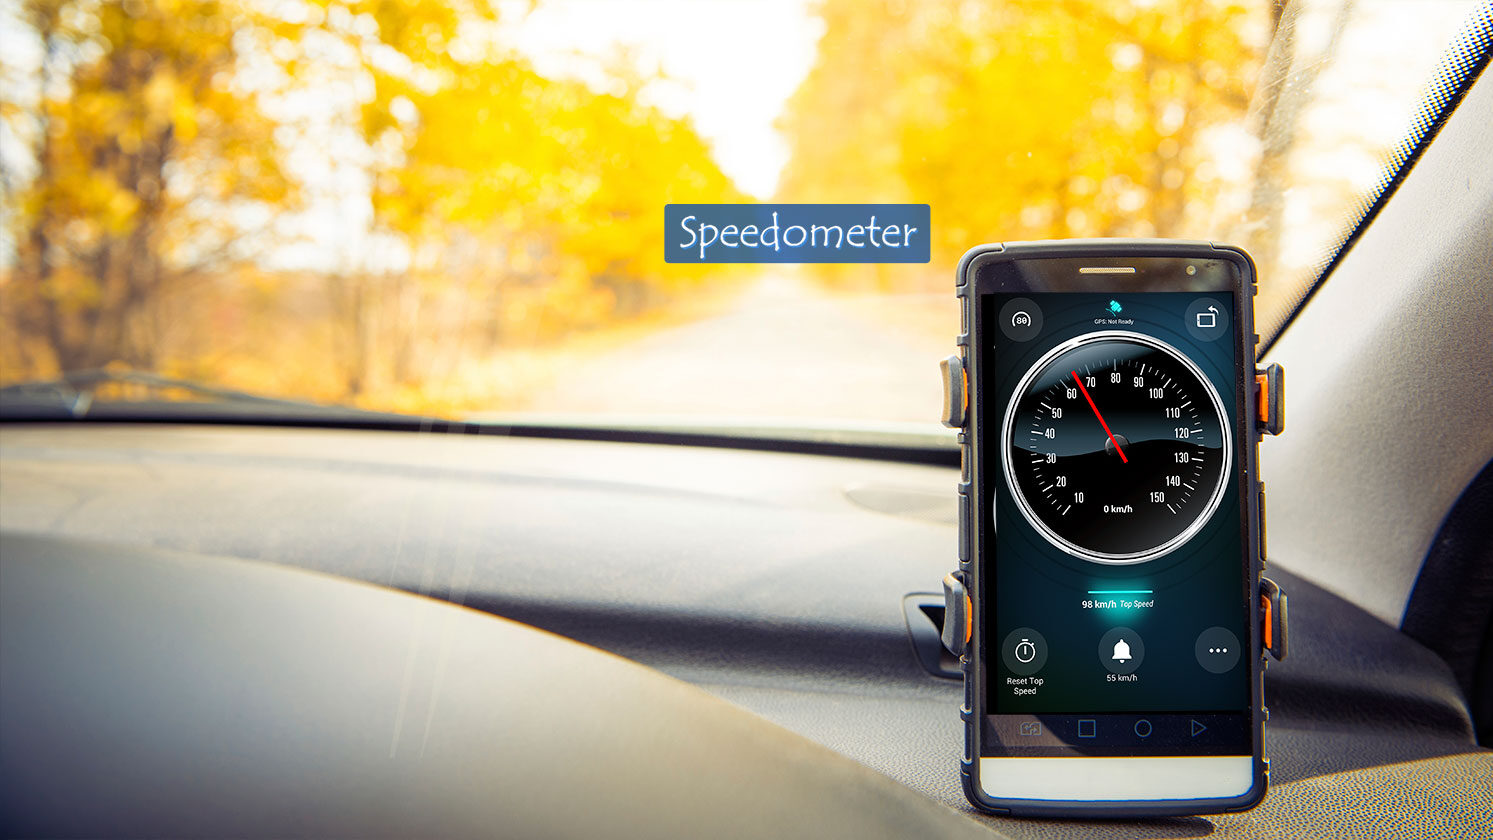 Top 5 Features to Look for in a Speedometer App